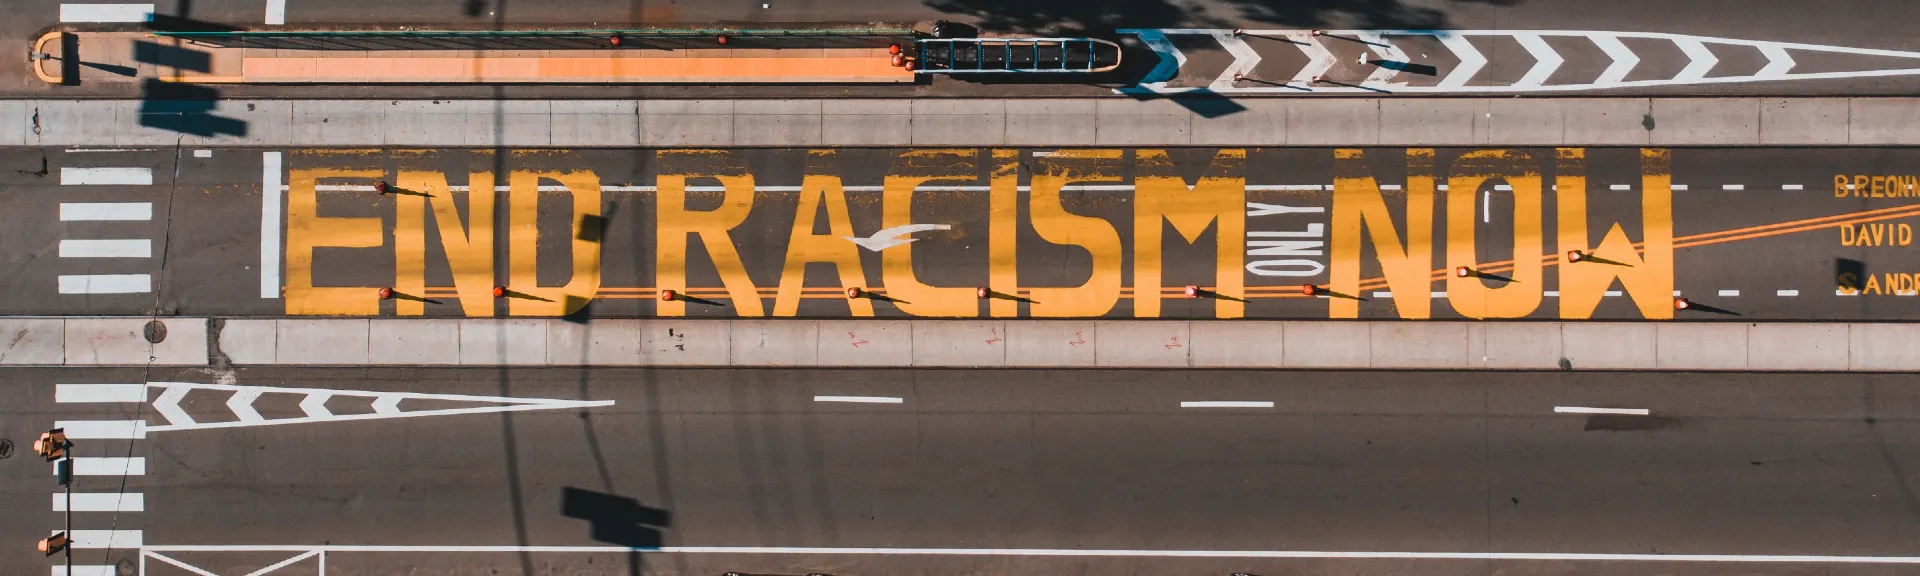 racism sign on road